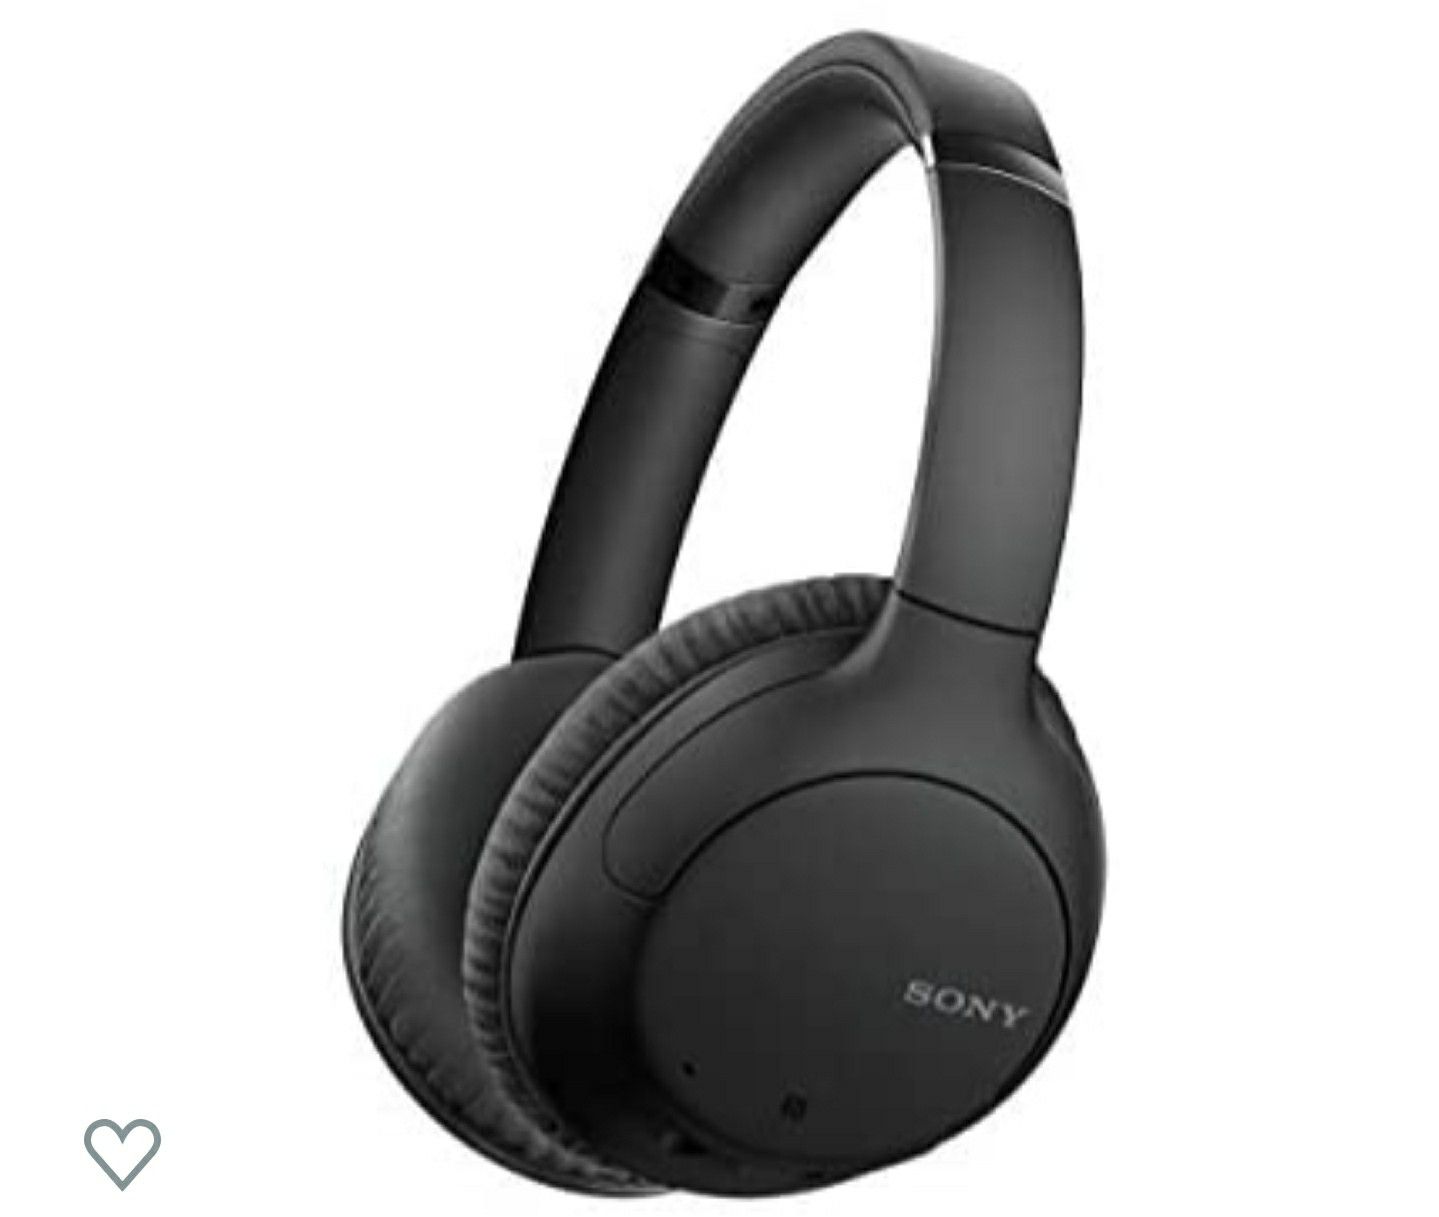 sony wireless noise cancelling stereo headset, headphone, noise cancelling, bluetooth, wireless, black, music, call, not an earbud, very comfortable